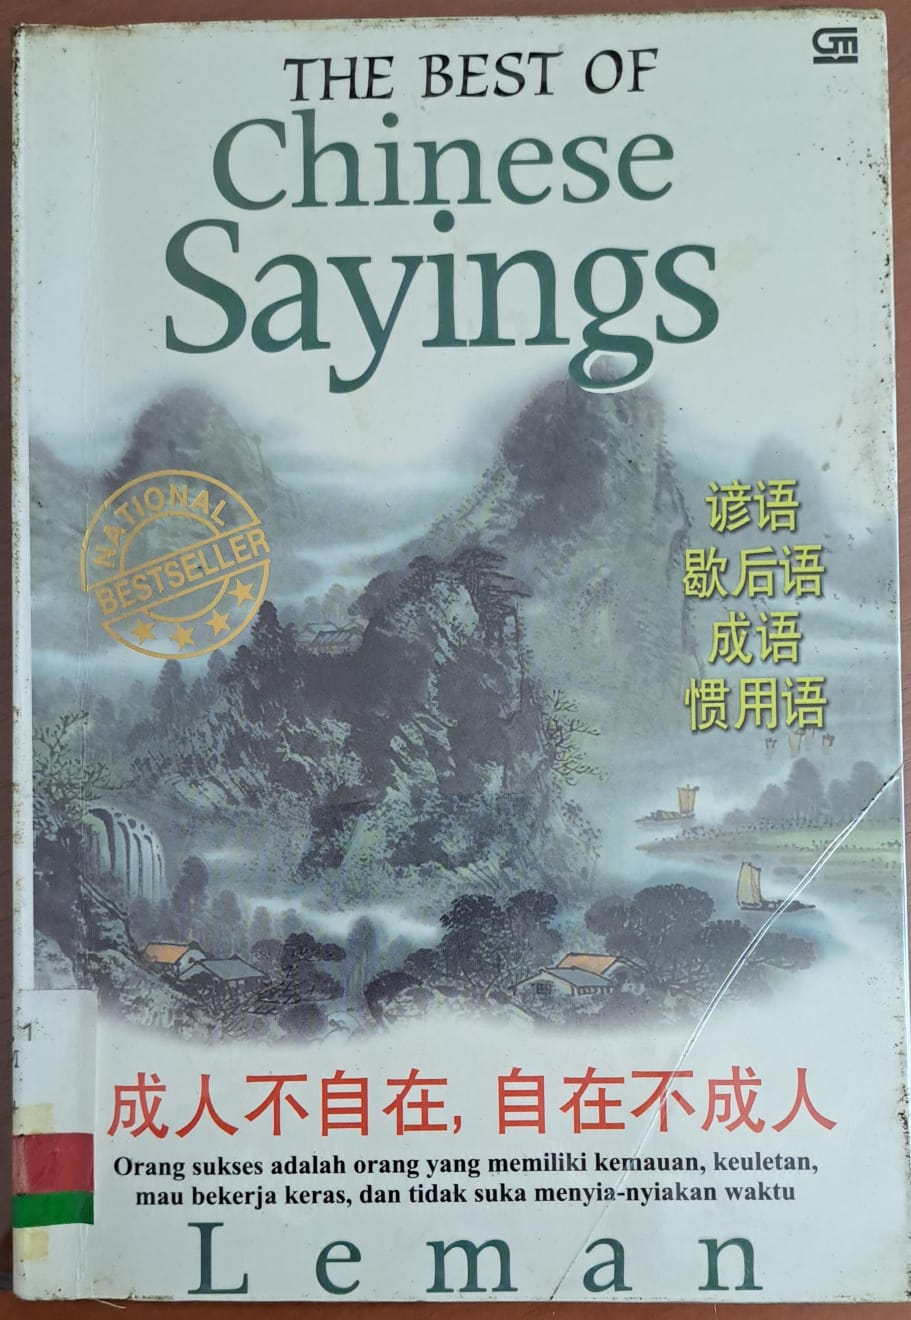 The best of Chinese sayings